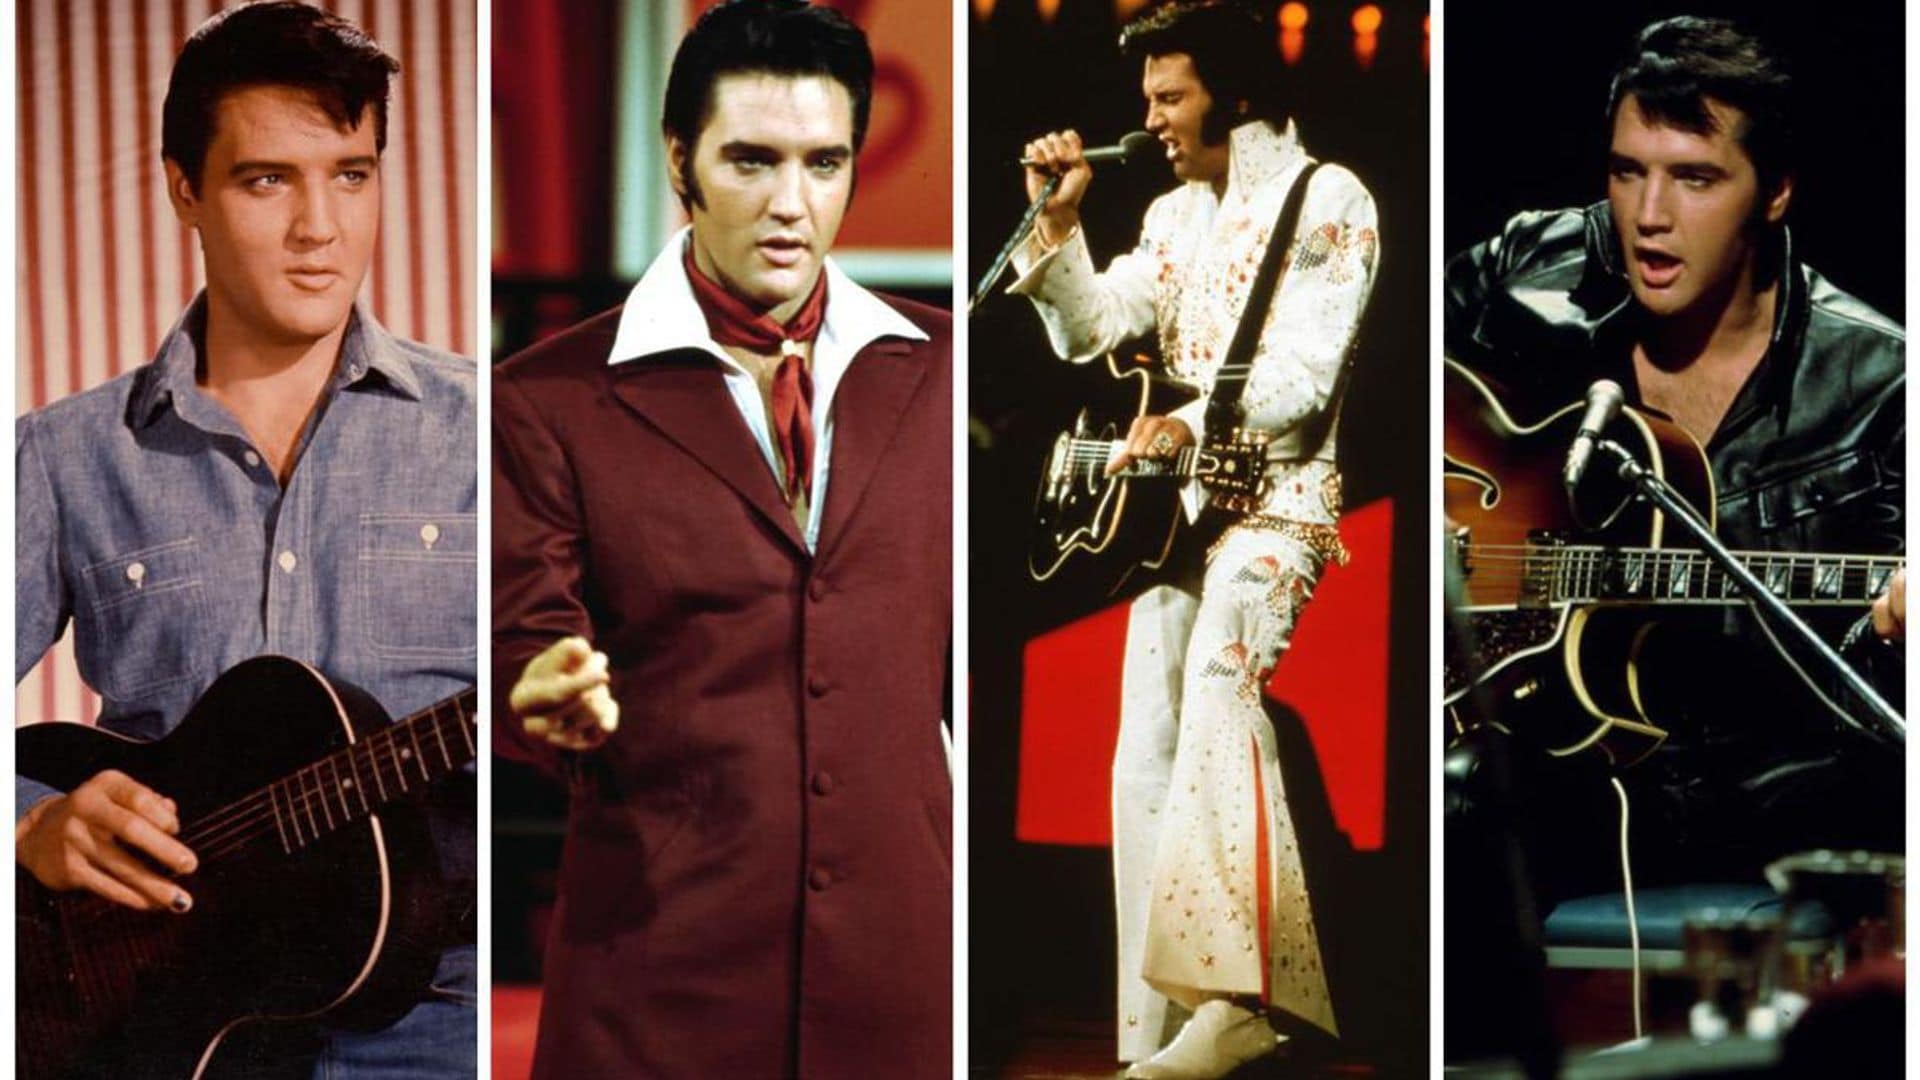 Elvis Presley’s fashion legacy: His most iconic looks over the years